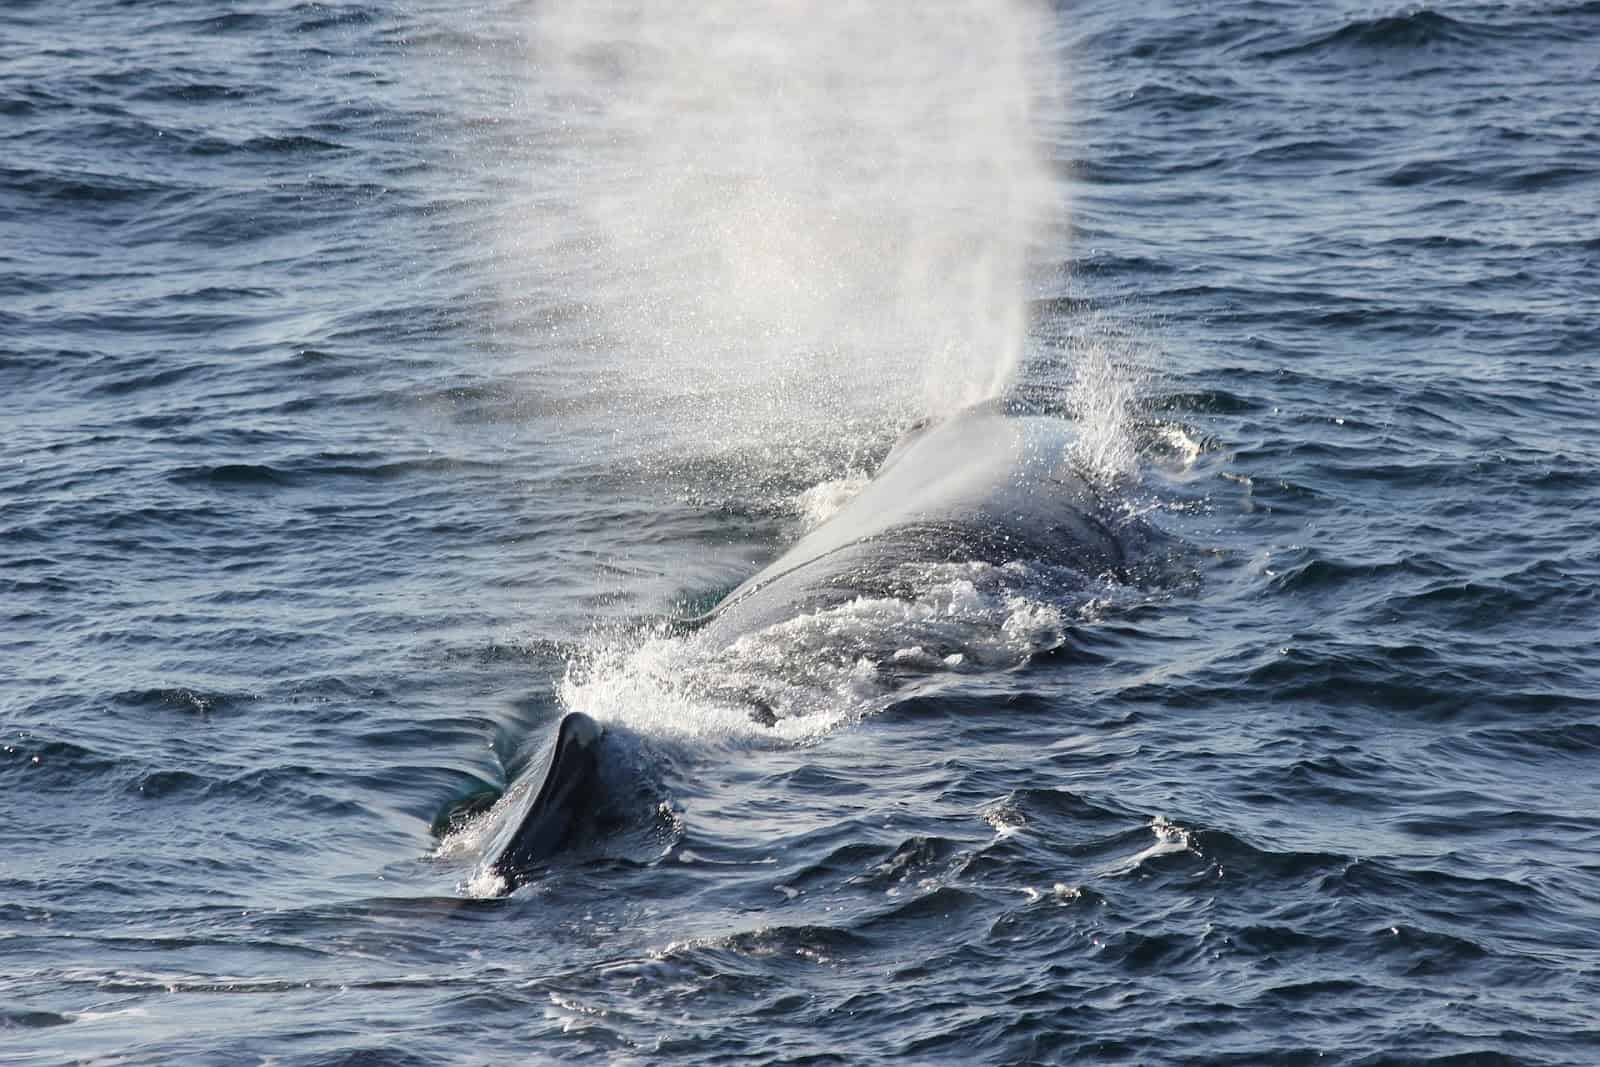 whale blowing spray from their blowhole